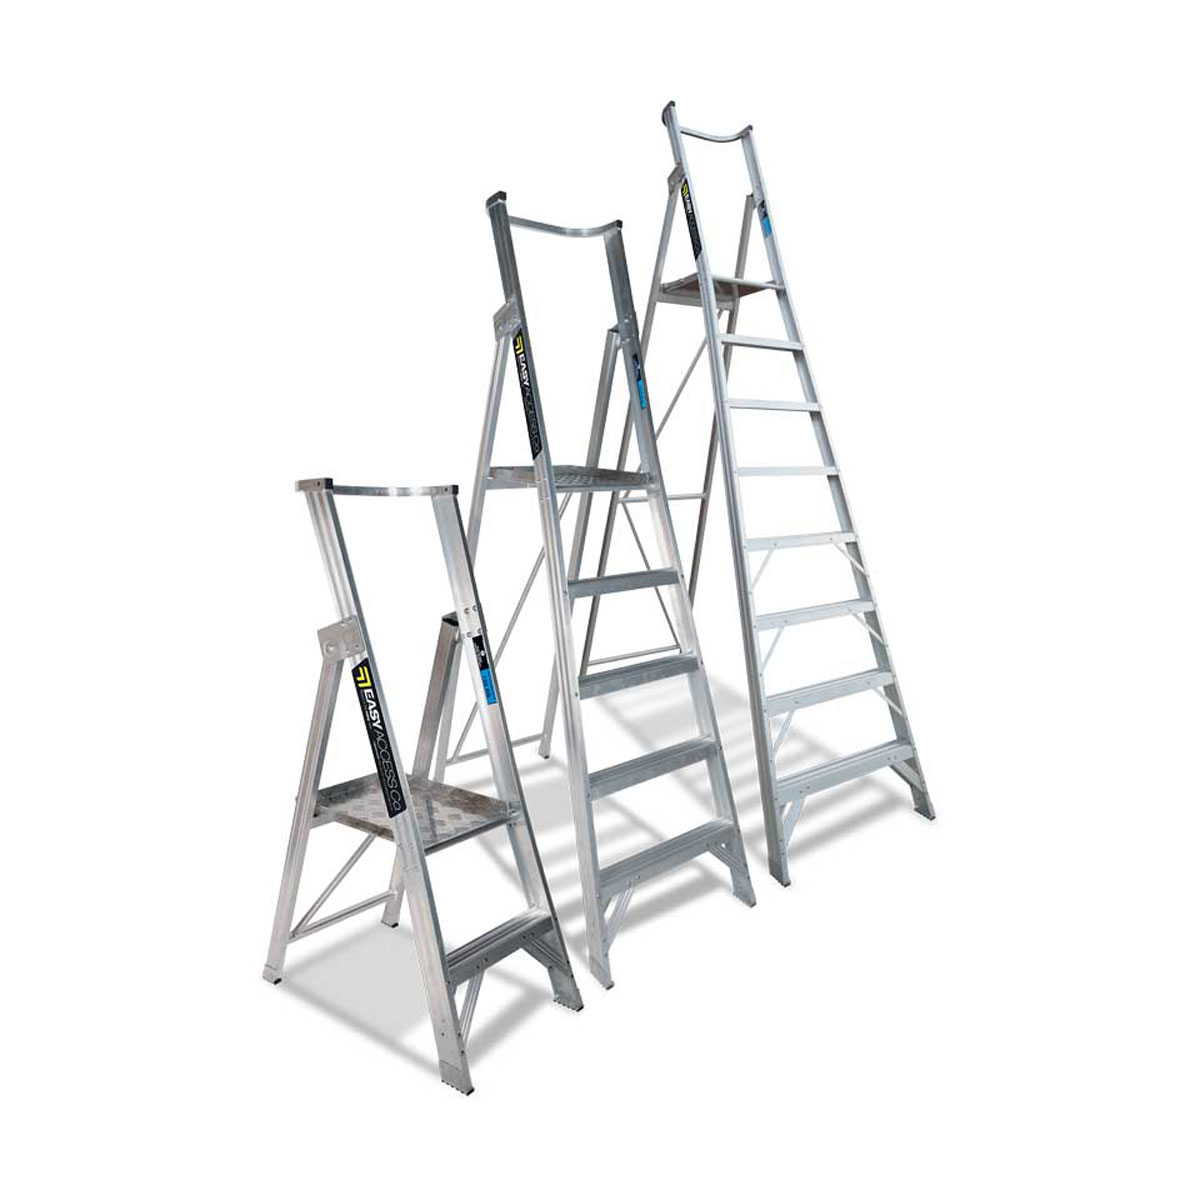 Buy Platform Ladders available at Astrolift NZ